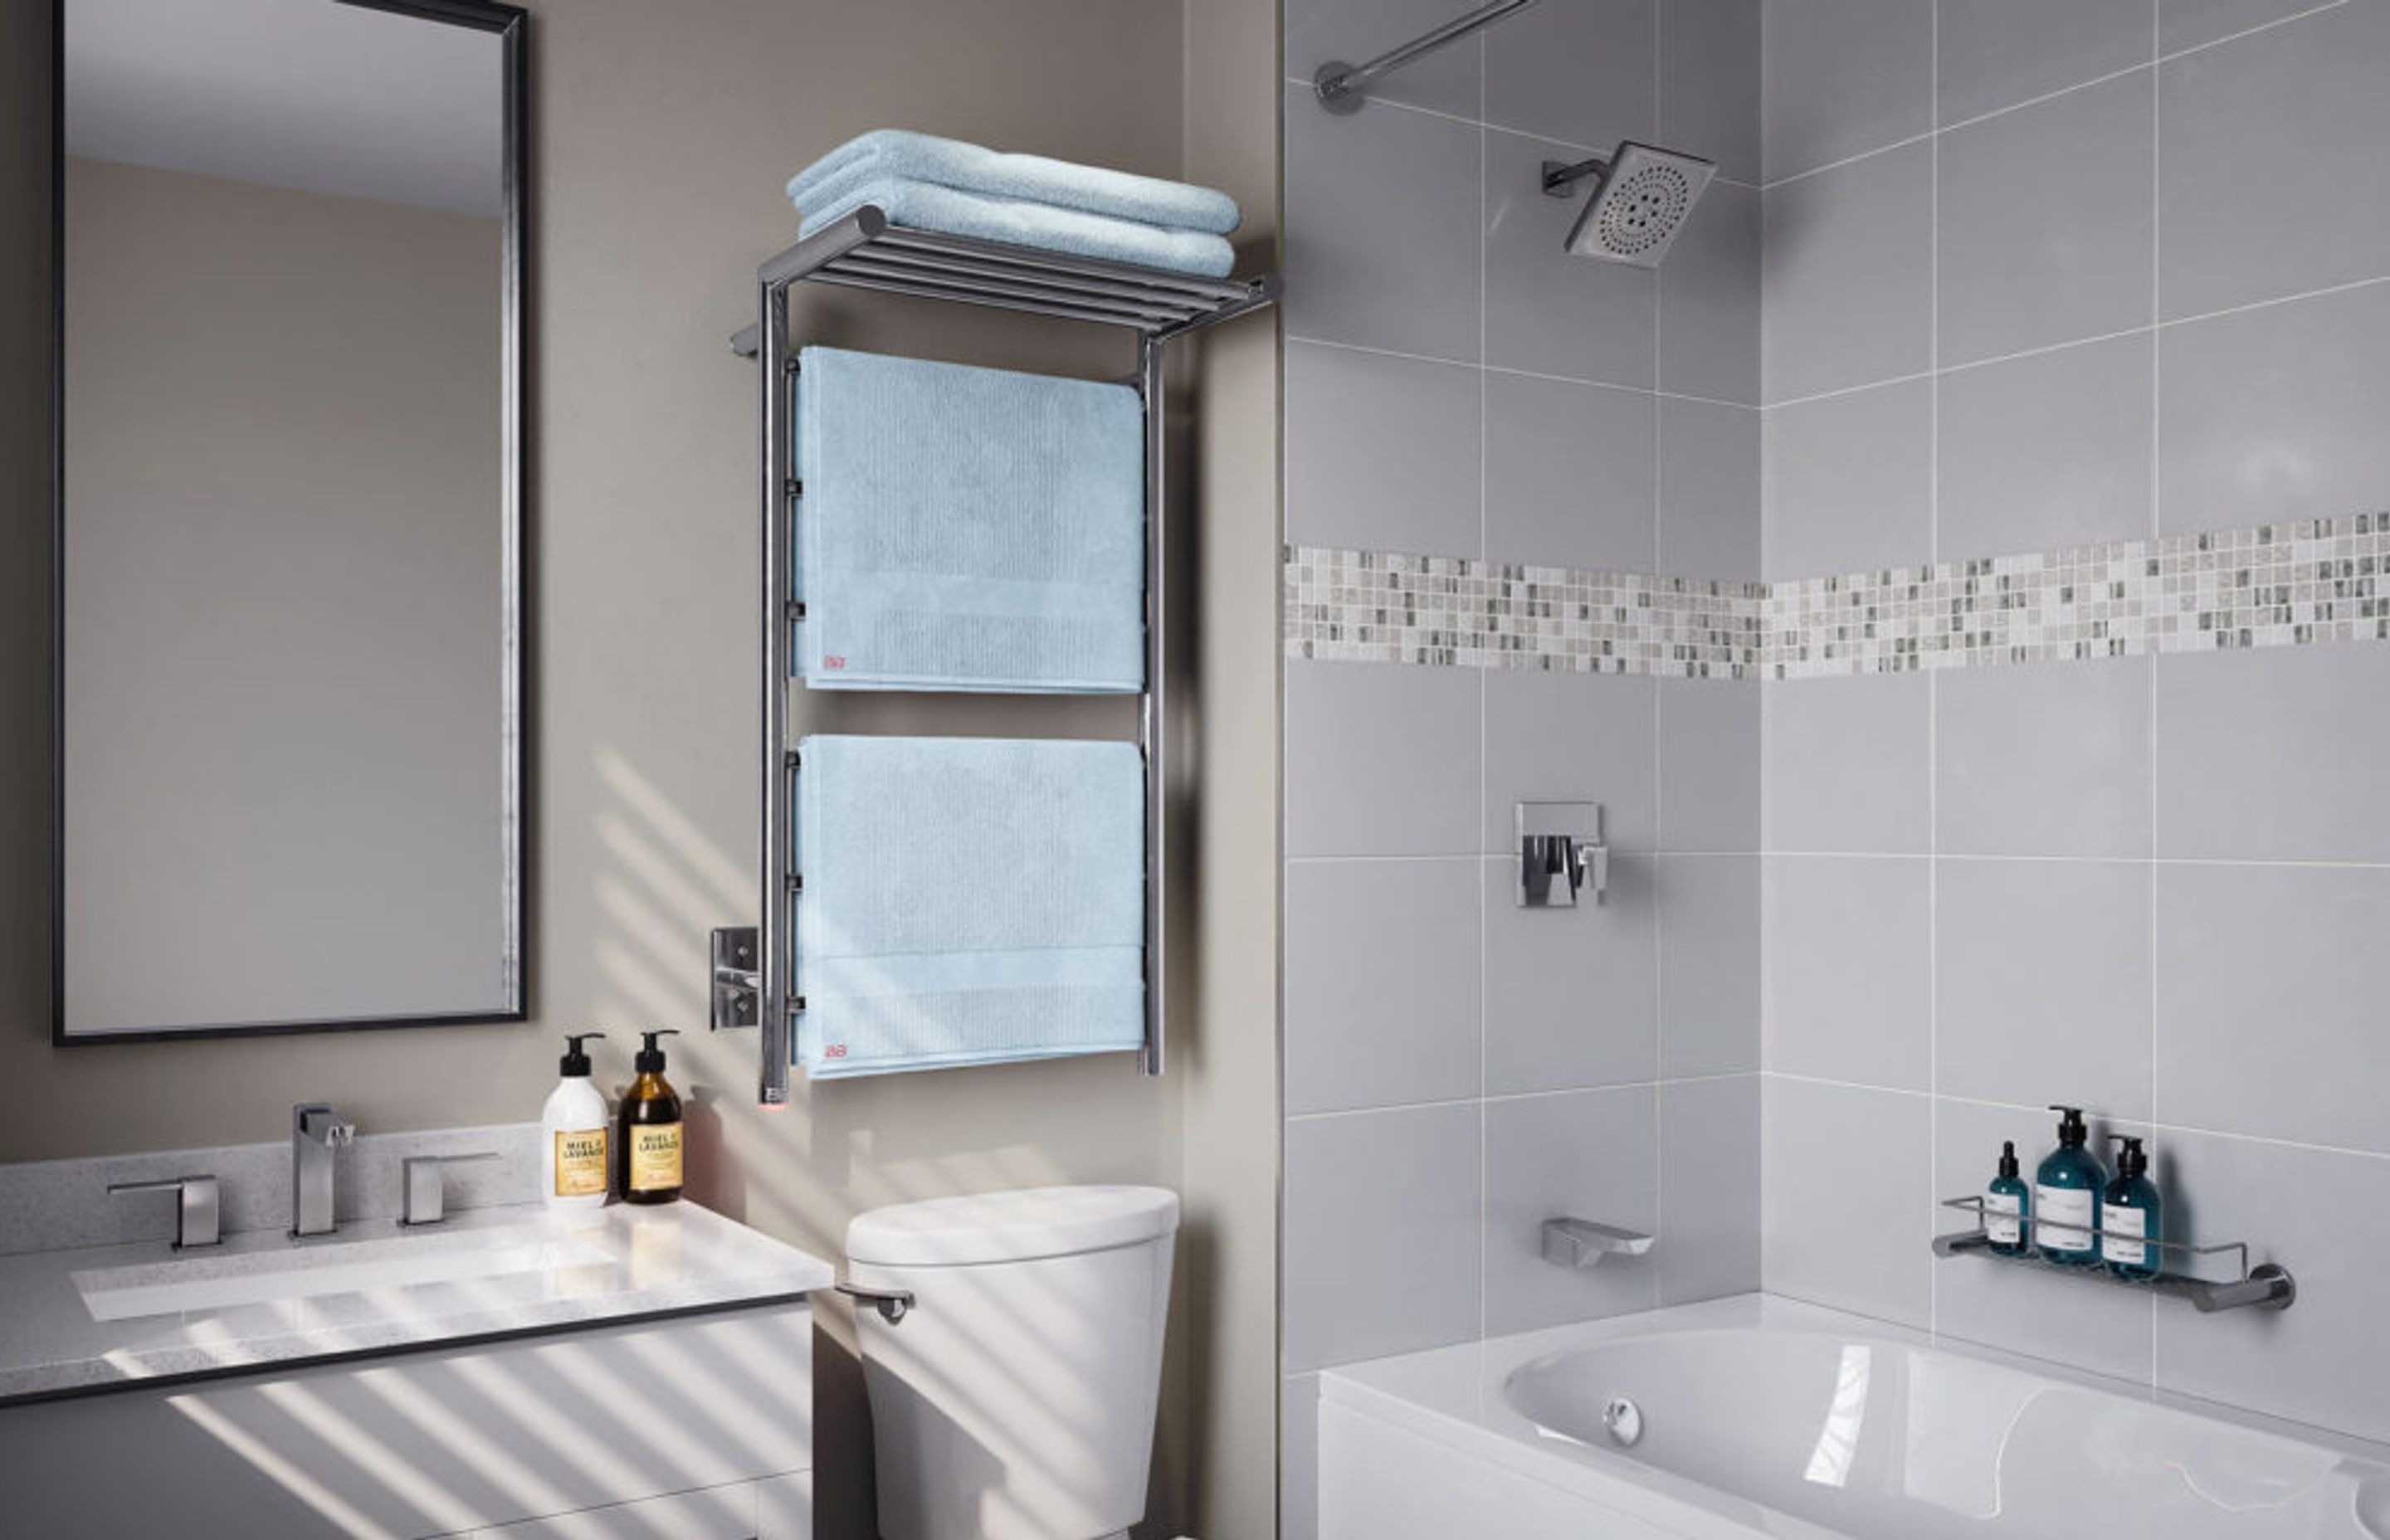 EDGE 10 Bar 500mm heated towel rail with PTSelect Switch (US model shown here - square cover plate)